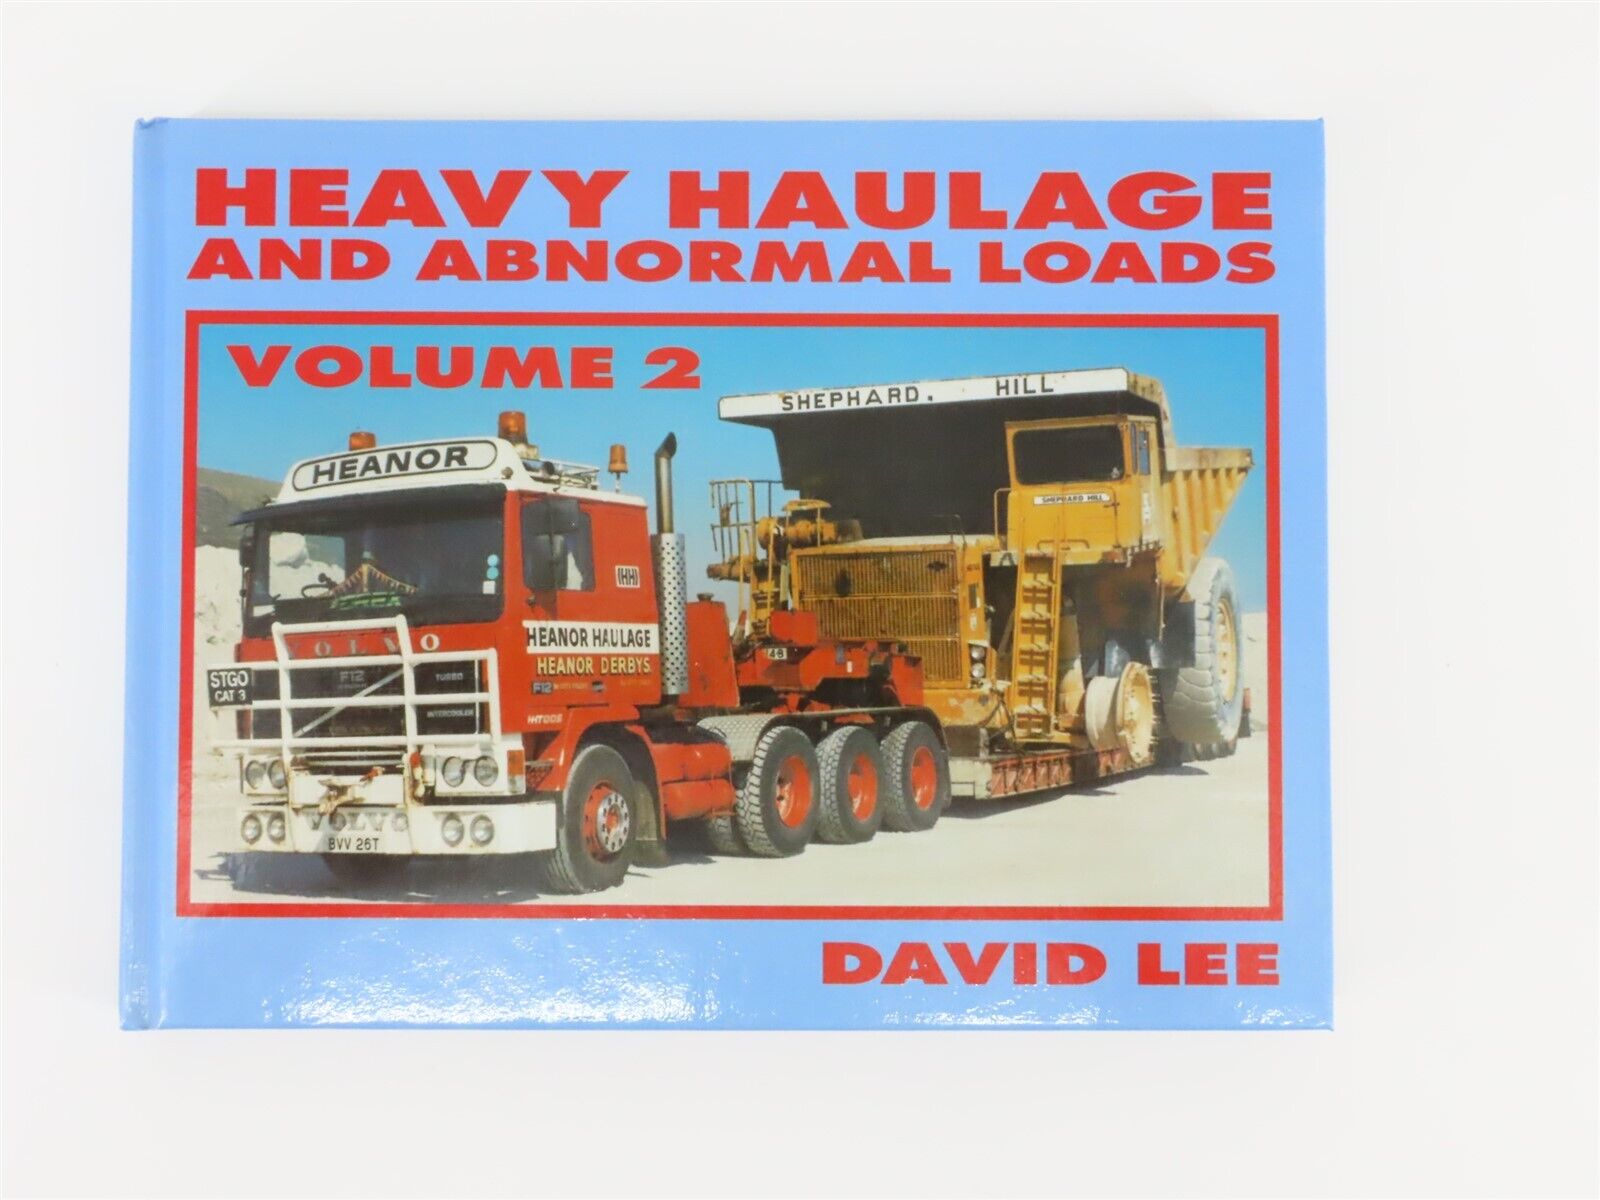 Heavy Haulage And Abnormal Loads Volume 2 by David Lee ©1994 HC Book